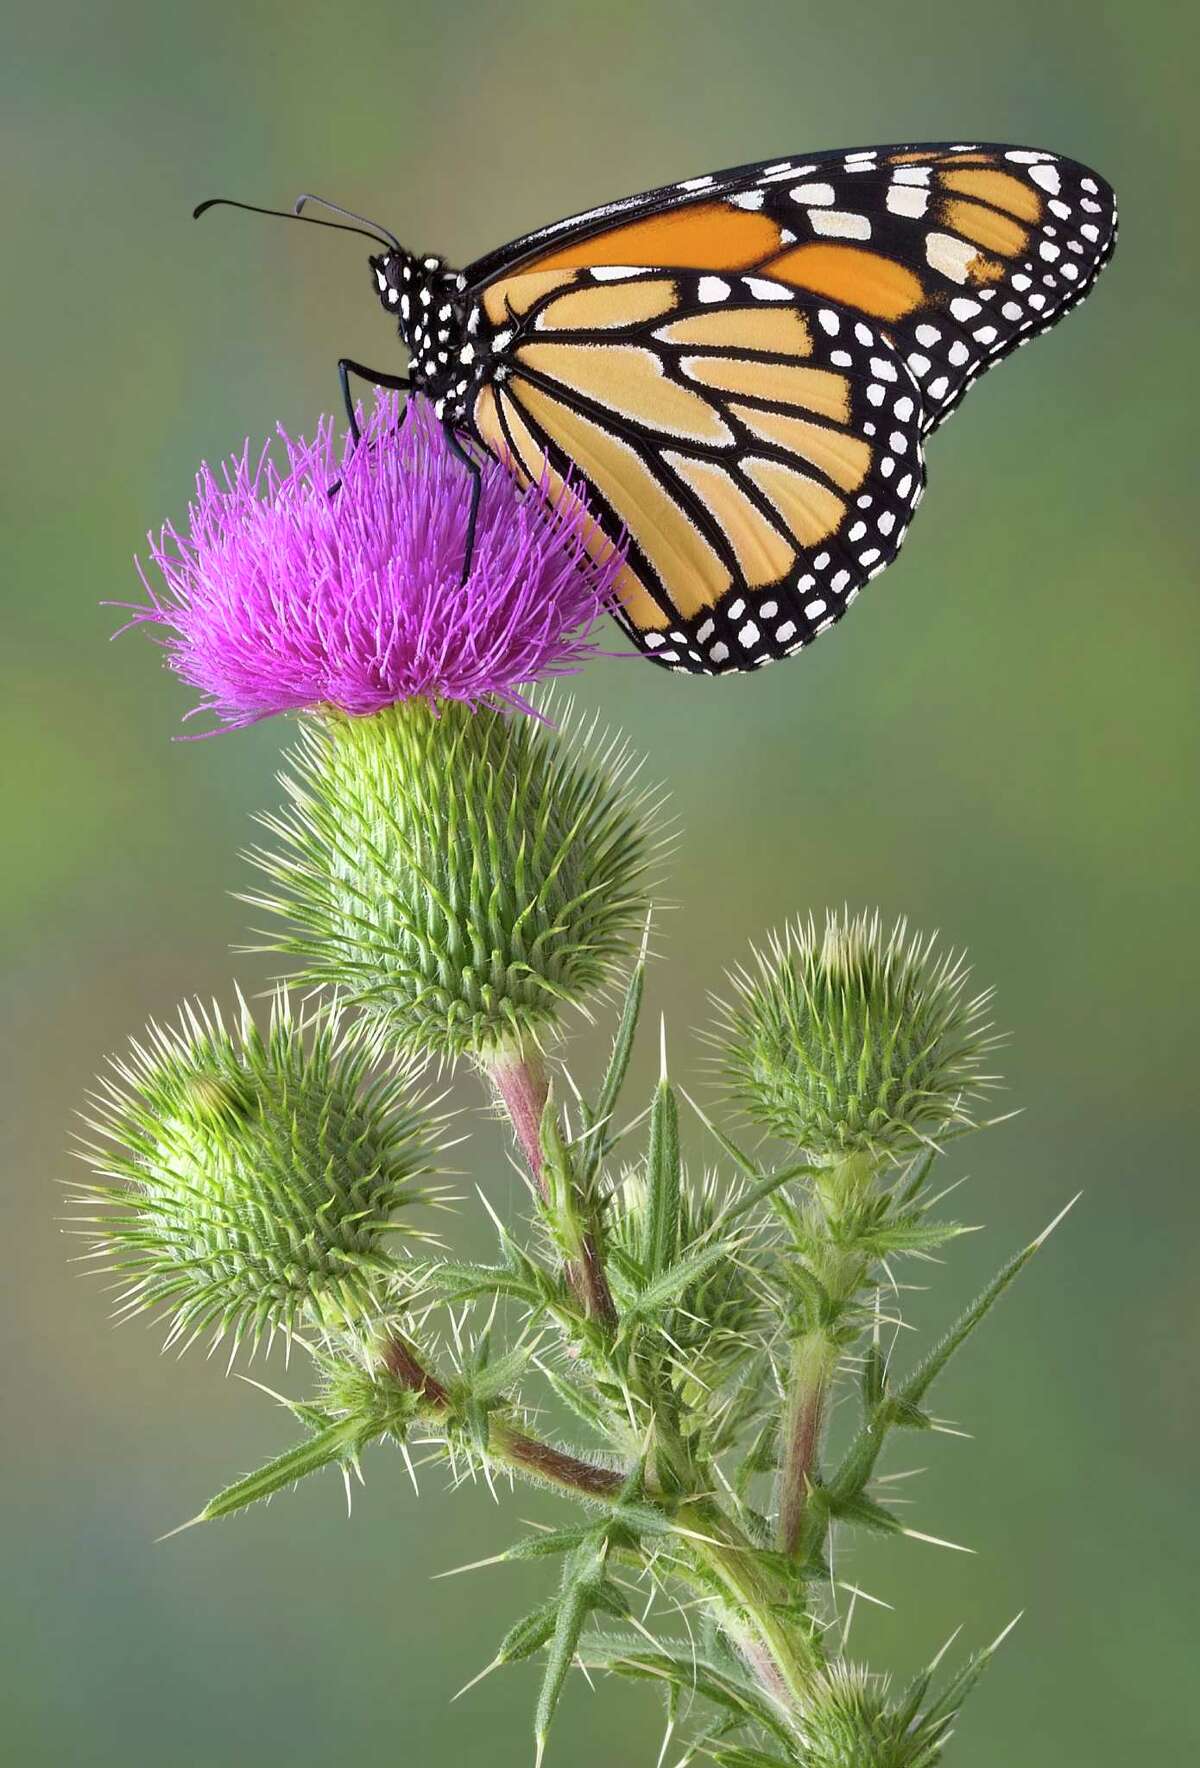 Monarchs prefer milkweed, and a federal grant announced Friday in Austin will help improve the butterfly’s habitat in nine states, including Texas.